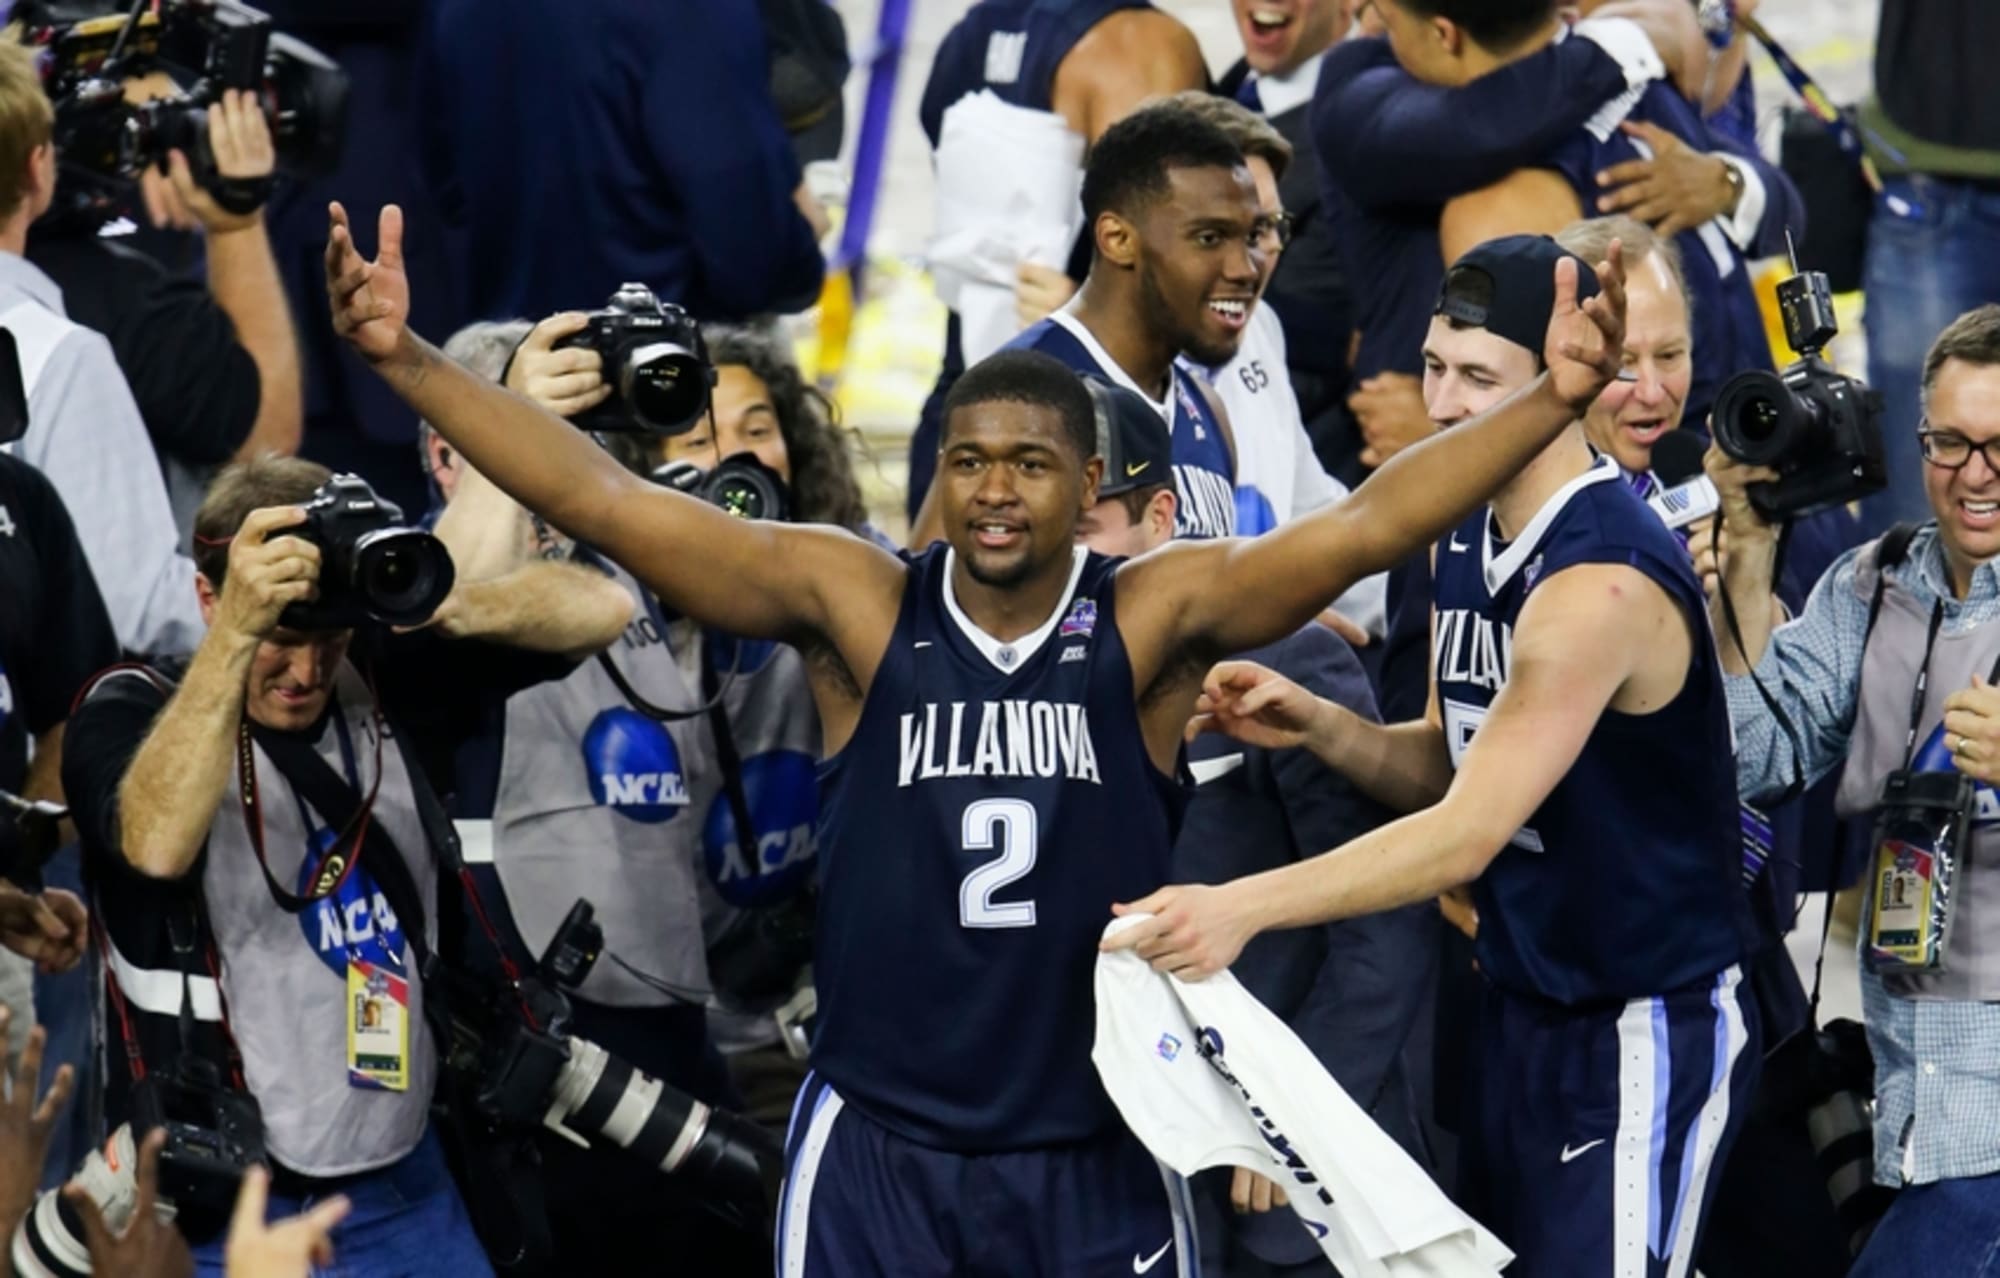 NCAA Tournament Villanova wins the National Title over UNC in instant